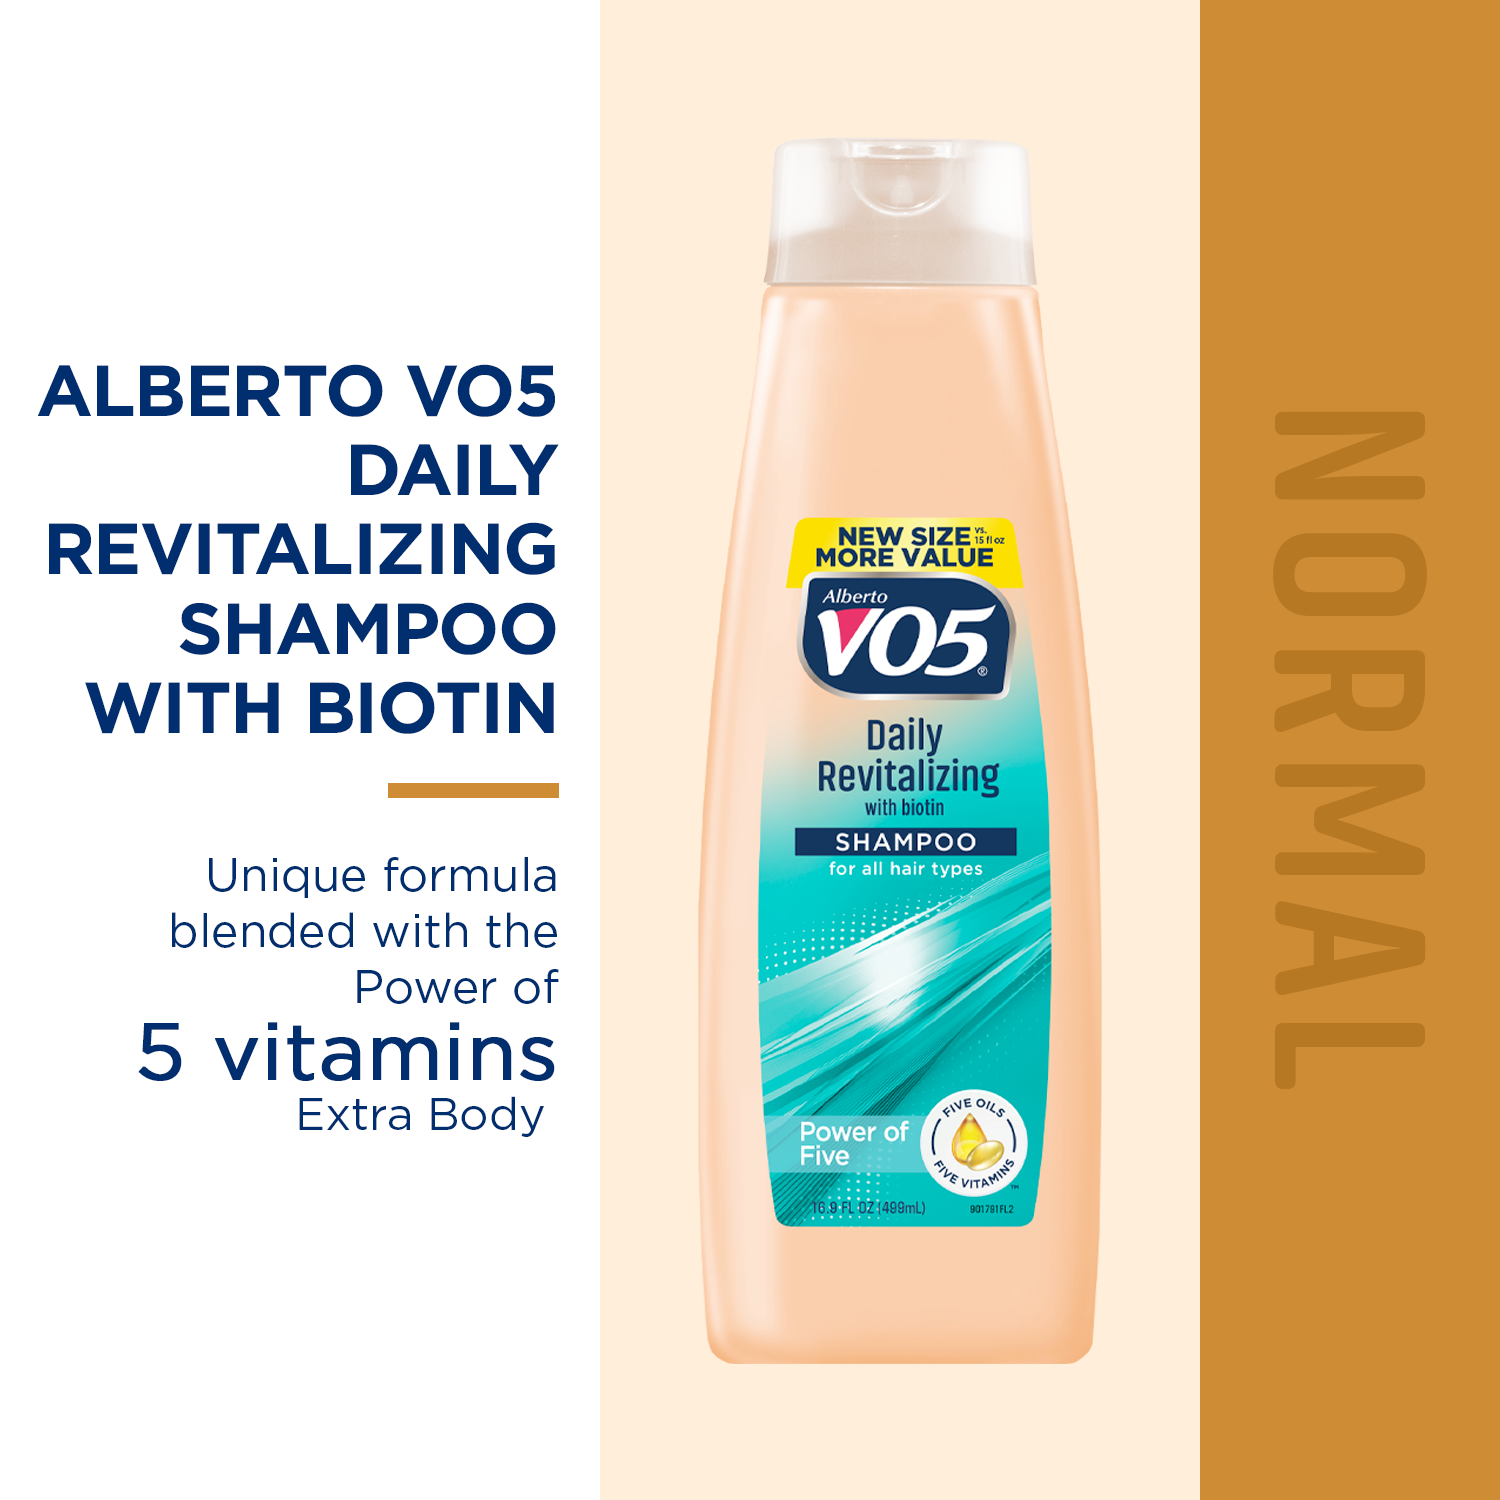 Alberto VO5 Daily Revitalizing Shampoo with Biotin, for All Hair Types,16.9 fl oz - image 3 of 6